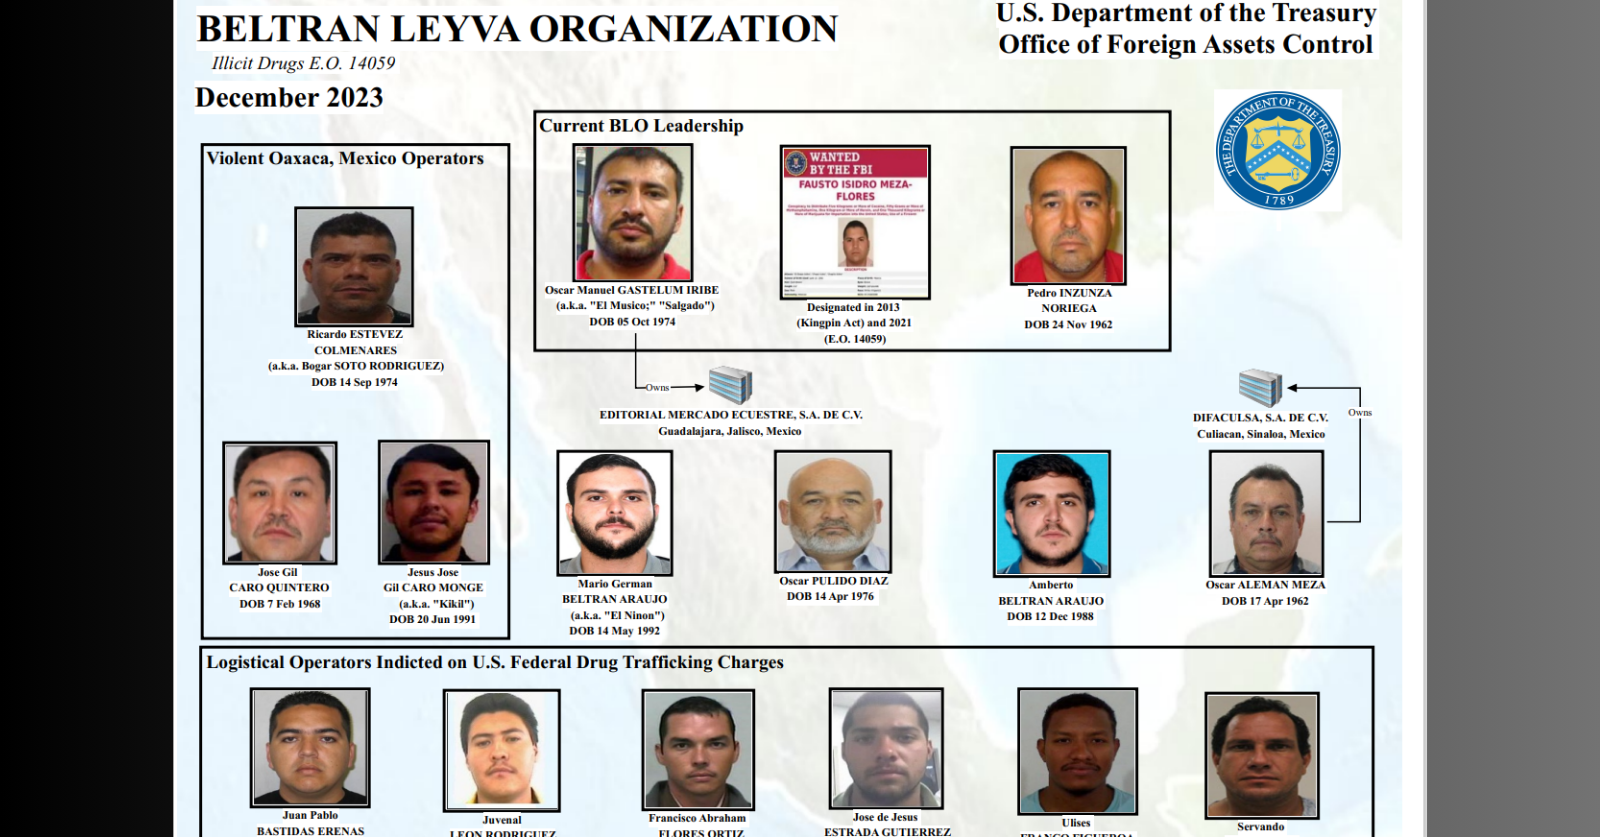 U.S. Treasury targets Beltrán Leyva organization in new sanctions: A move against a major drug trafficking and fentanyl network